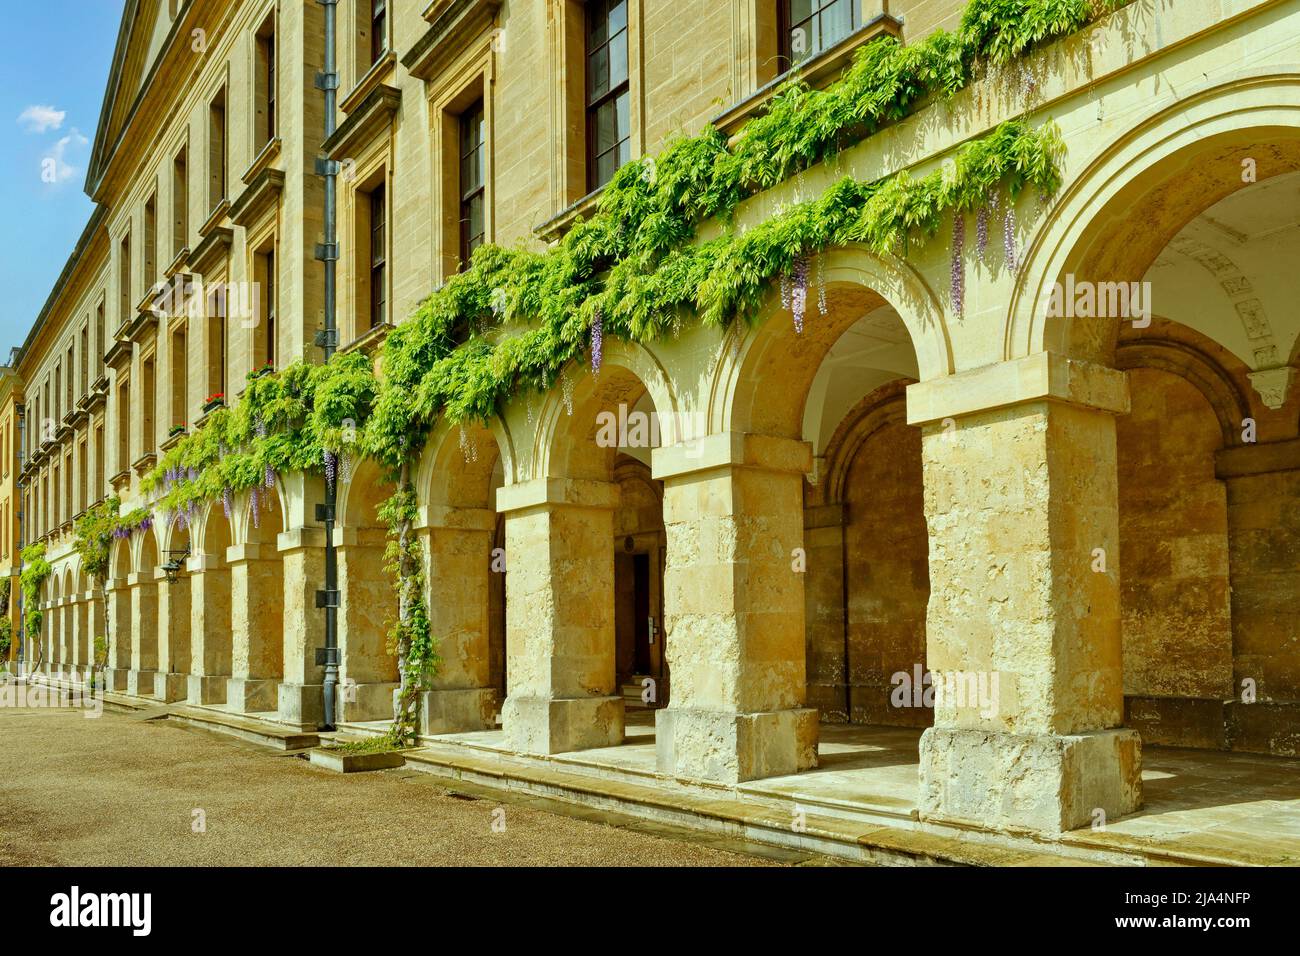 OXFORD CITY ENGLAND MAGDALEN COLLEGE WISTERIA AND FLOWERS ABOVE THE CLOISTERS OF THE NEW BUILDING Stock Photo